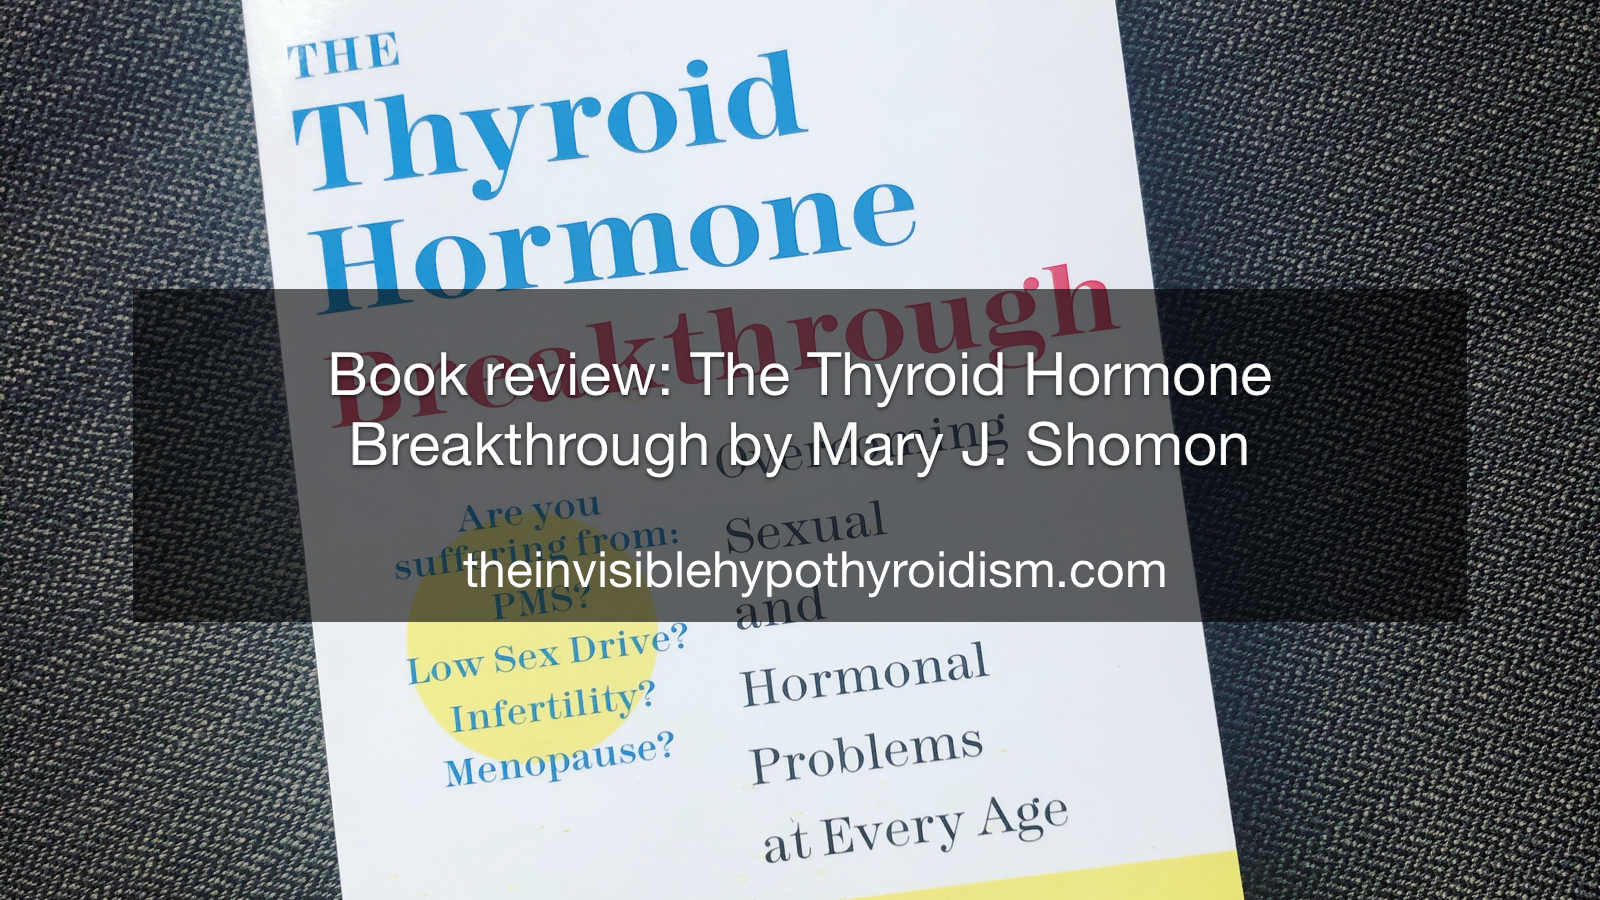 Book review: The Thyroid Hormone Breakthrough by Mary J. Shomon